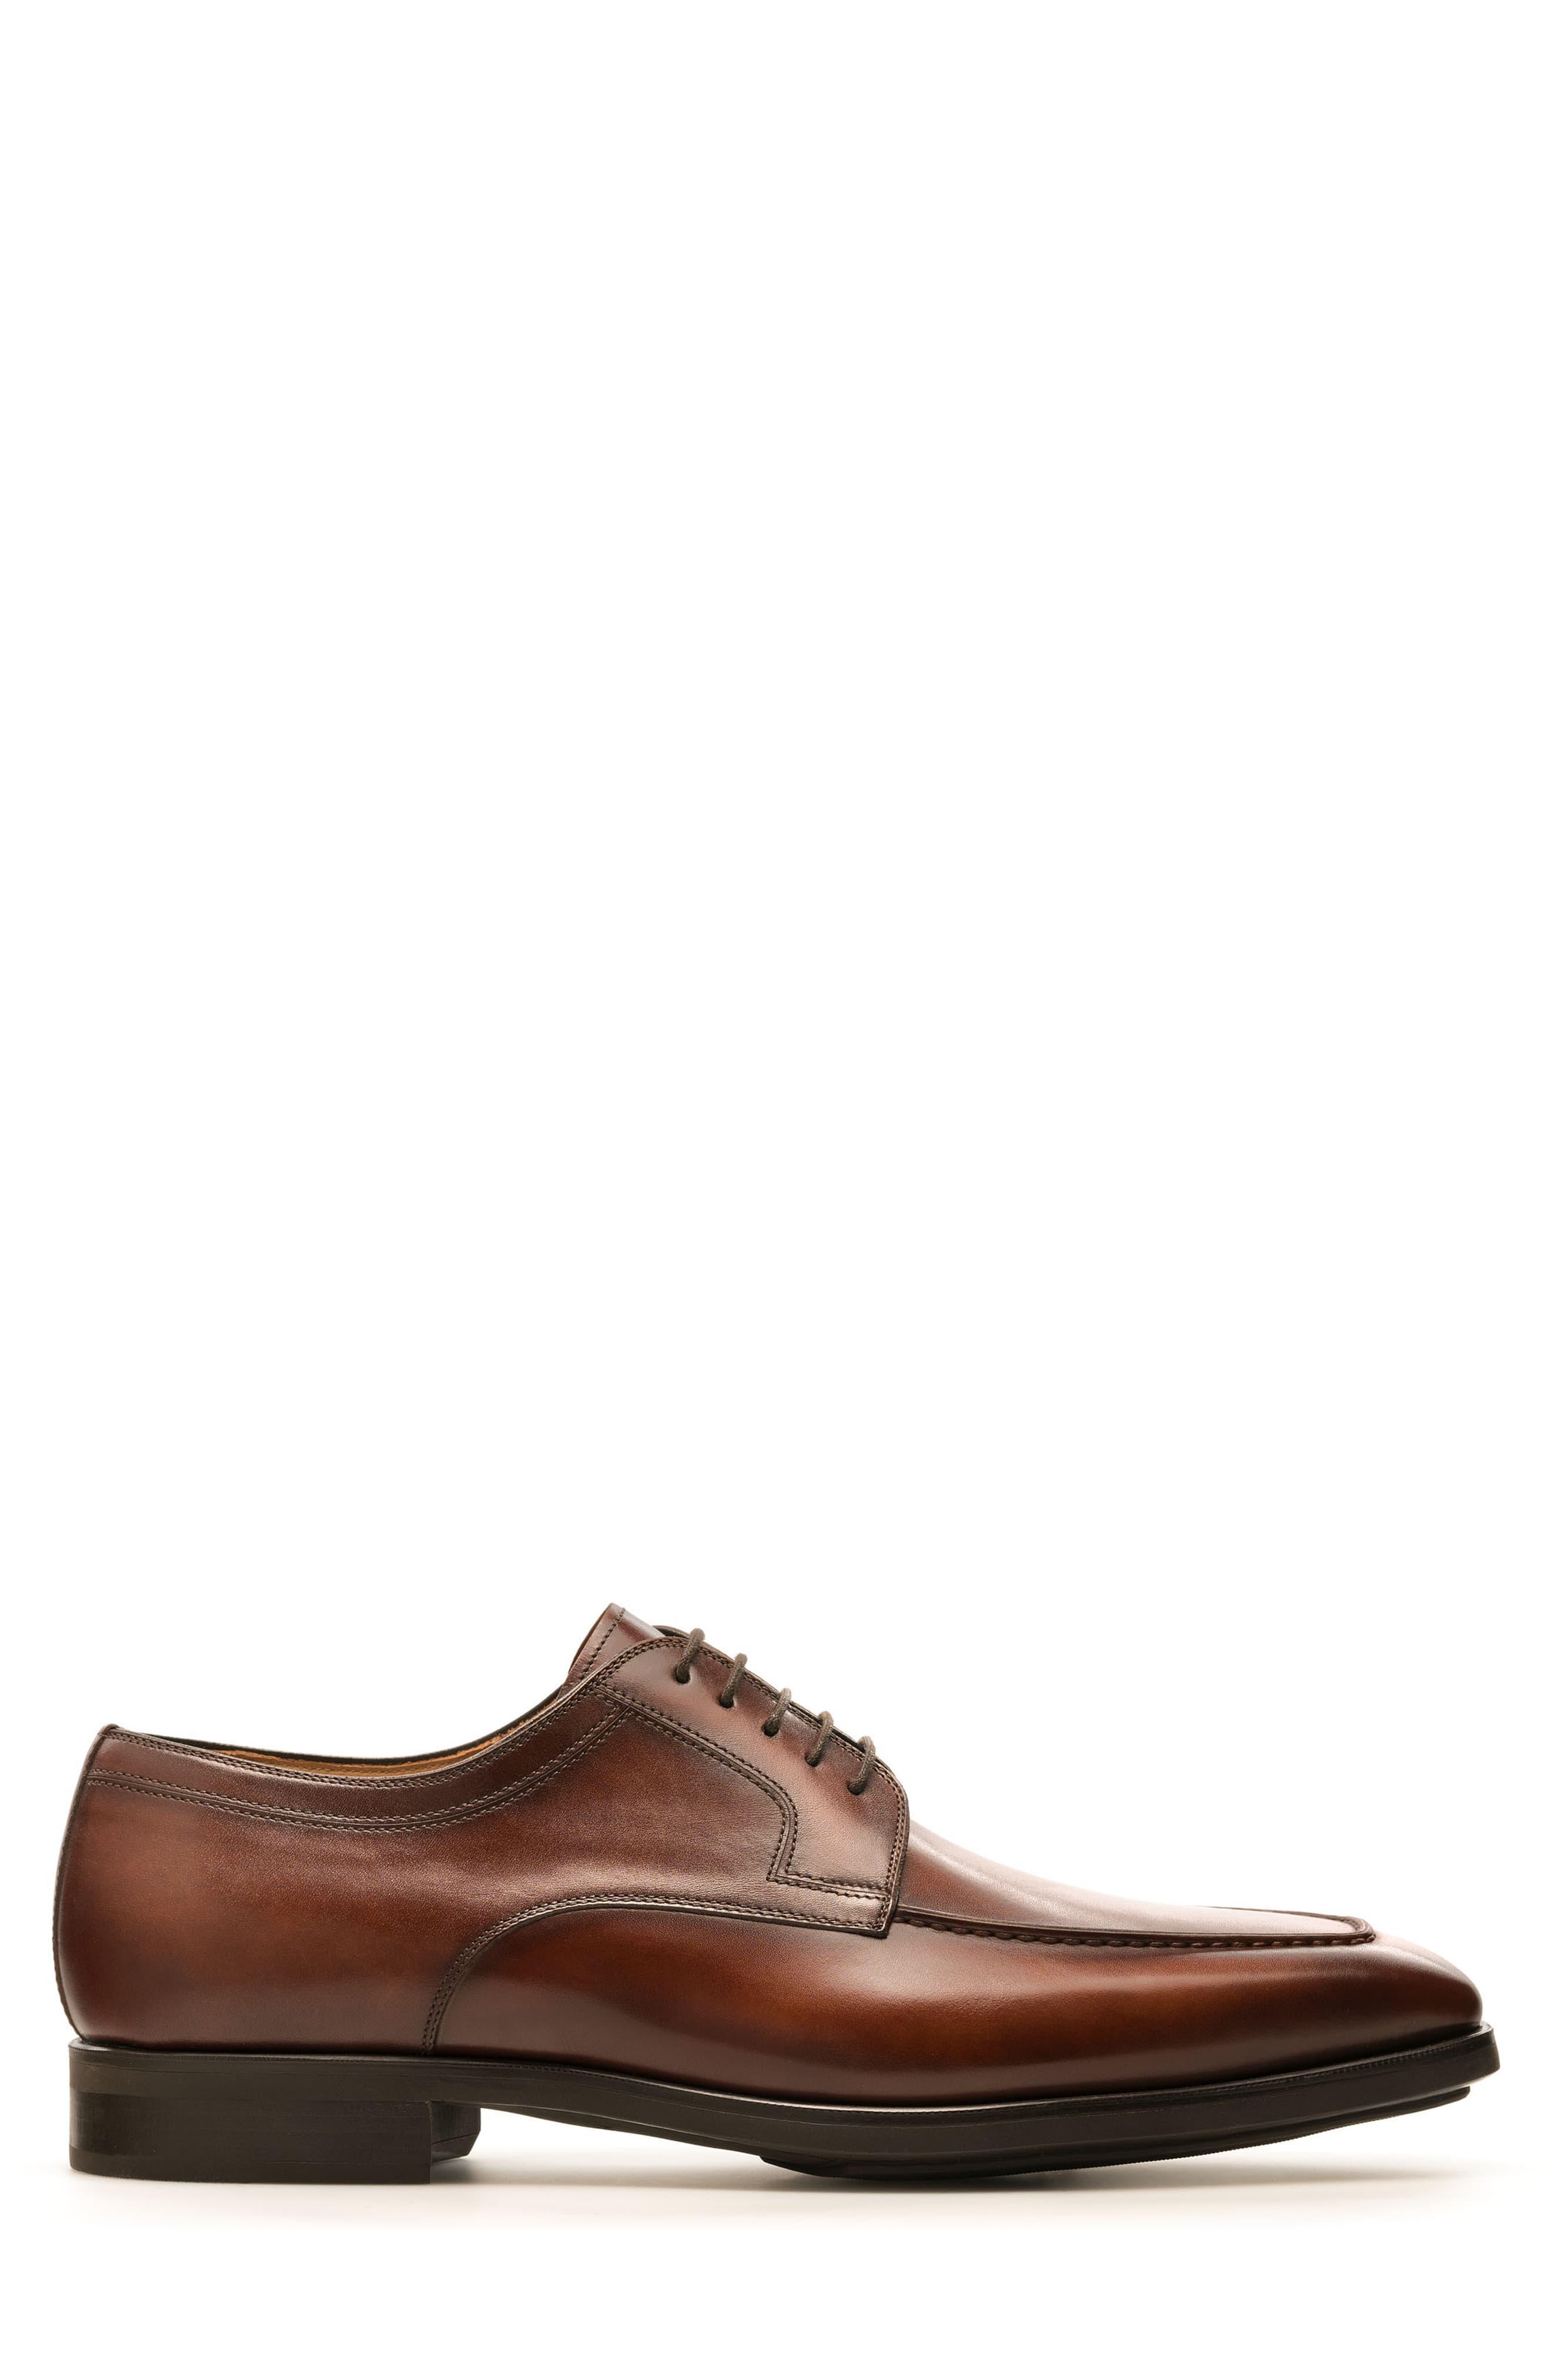 Magnanni Leather Romelo Diversa Apron Toe Derby in Cognac Leather ...